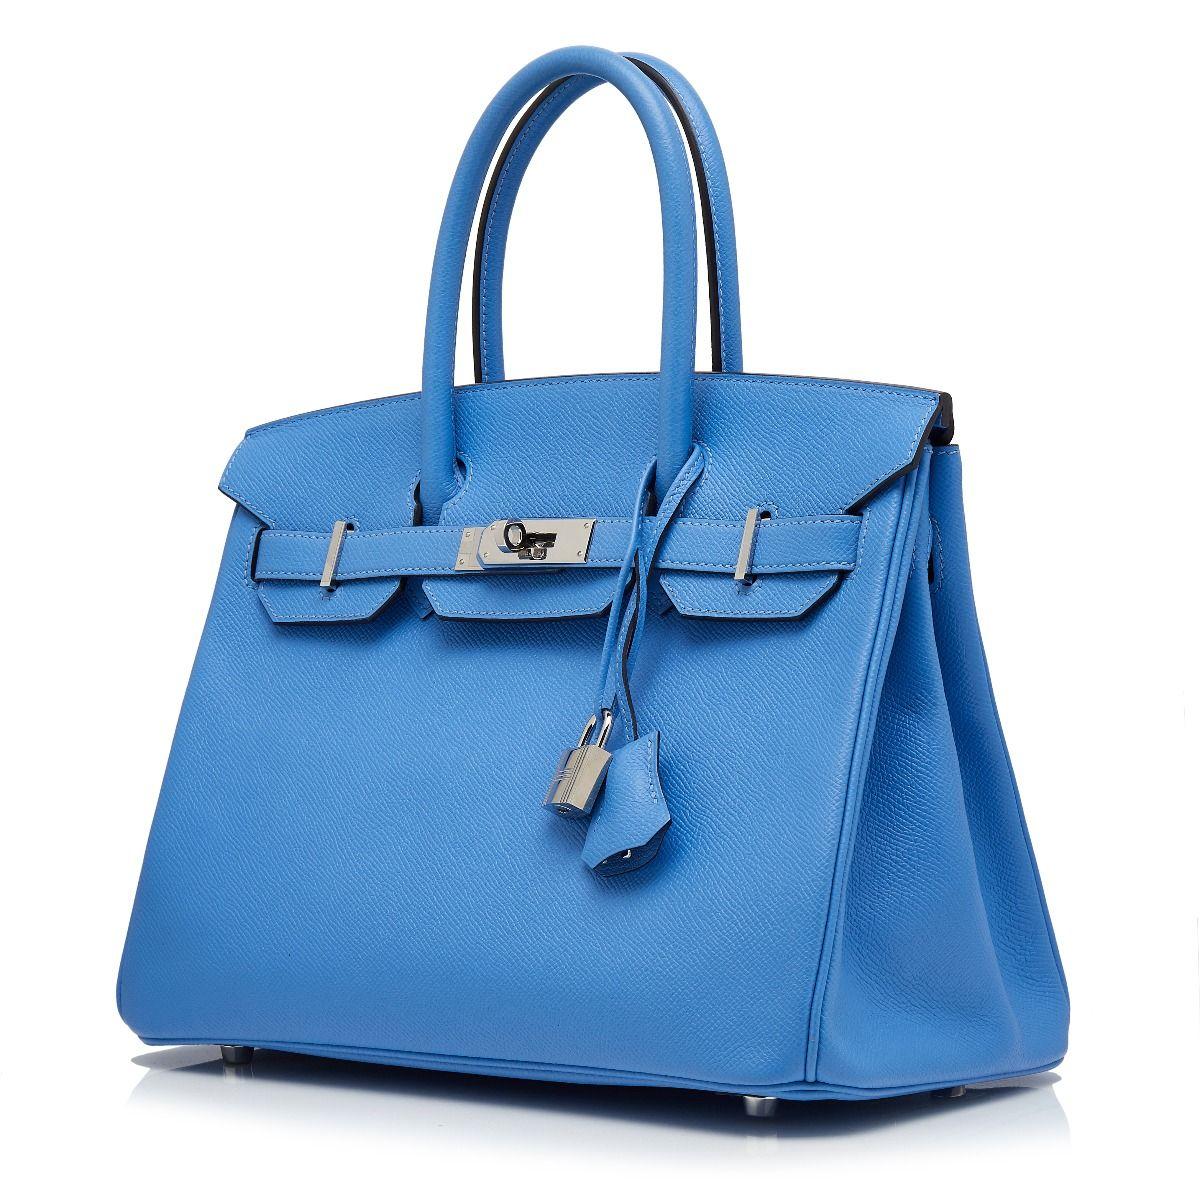 Adding a twist to the traditional Hermès Birkin, this truly spectacular, one-of-a-kind rarity combines a vivid paradise blue epsom leather exterior with silver-tone metal accents, for an effect that is unexpectedly modern and fresh. Crafted in